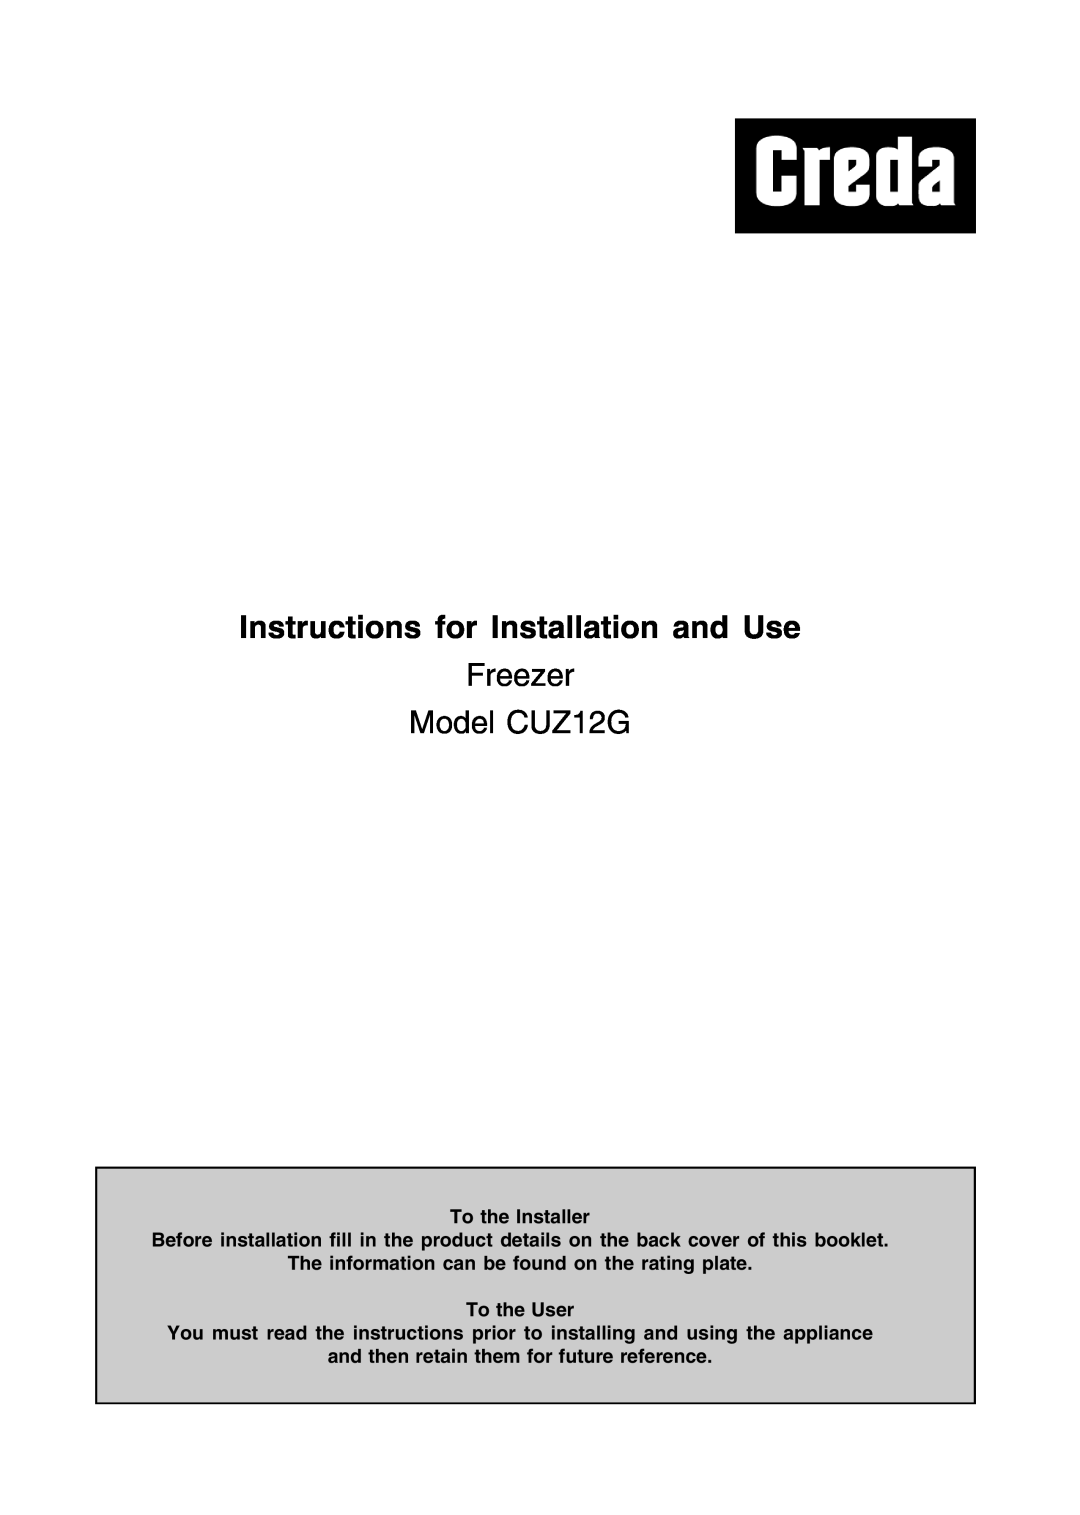 Creda manual Instructions for Installation and Use, Freezer Model CUZ12G, To the Installer 